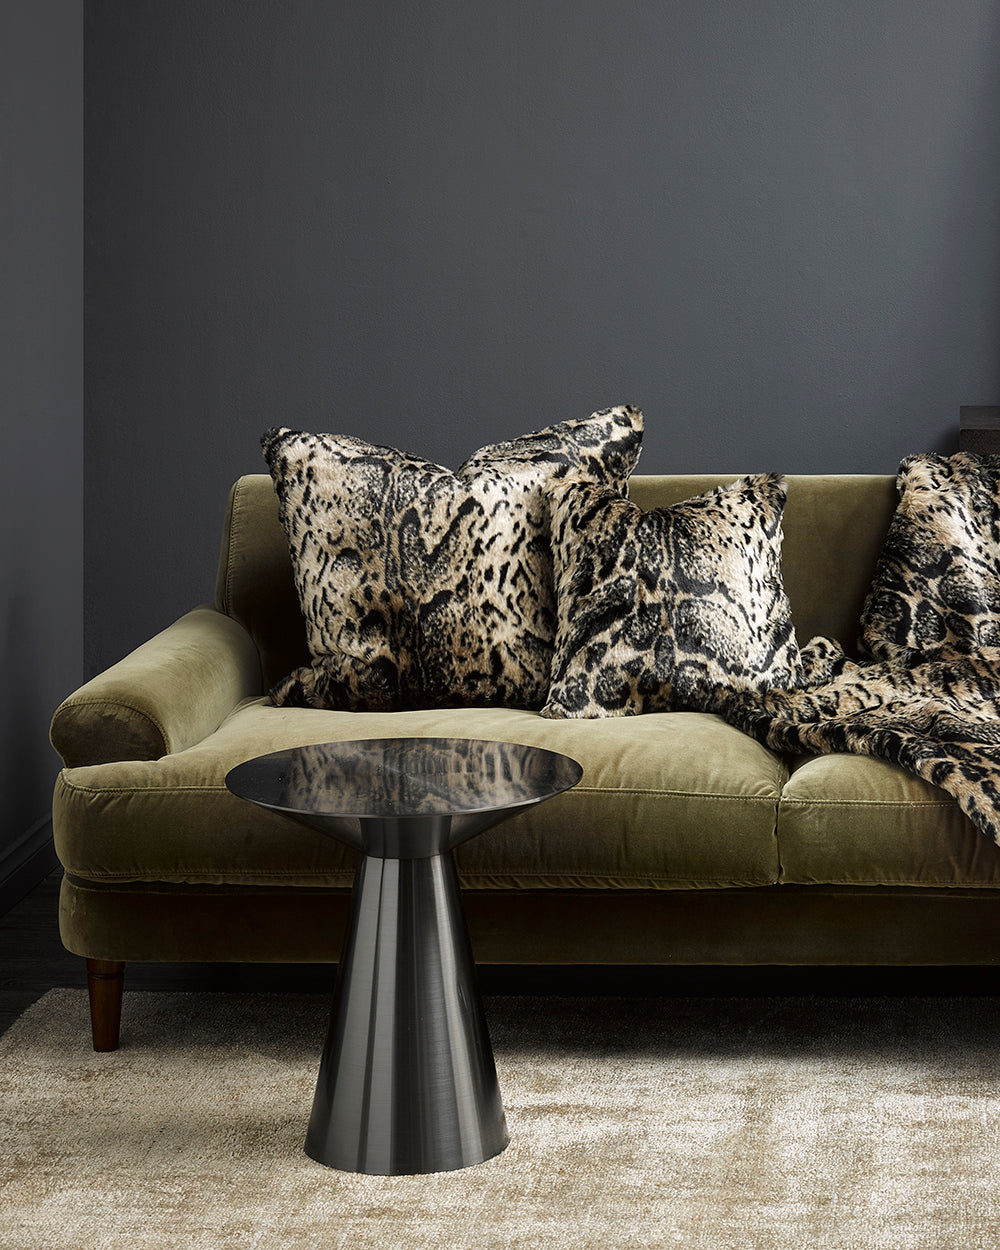 Heirloom African Leopard Cushions in Faux Fur are available from Make Your House A Home Premium Stockist. Furniture Store Bendigo, Victoria. Australia Wide Delivery. Furtex Baya.